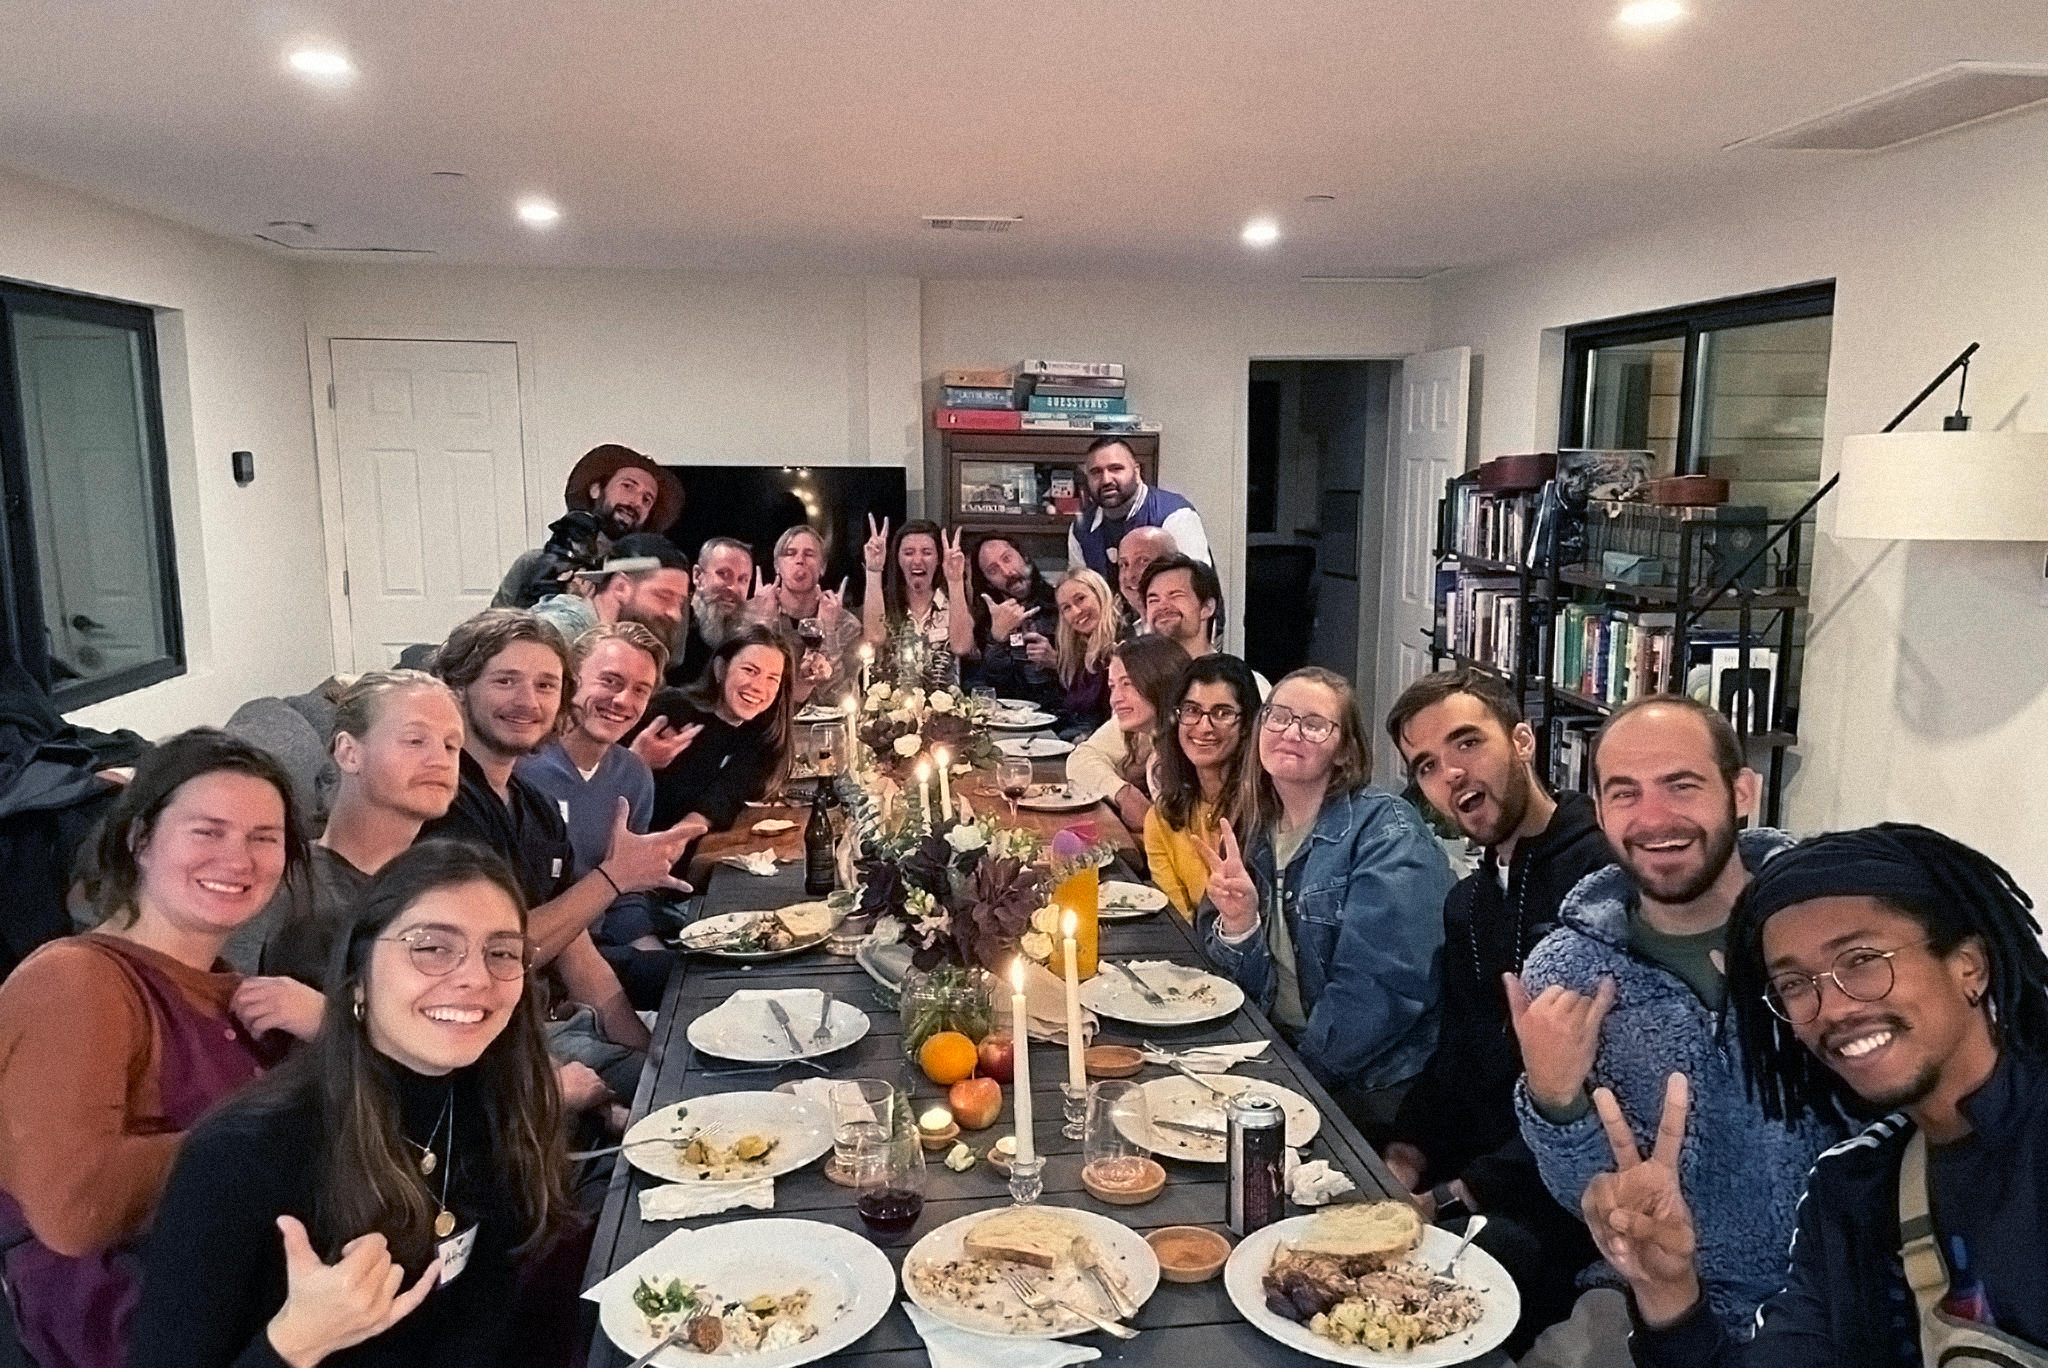 Community dinners are a hallmark of coliving with Cabin